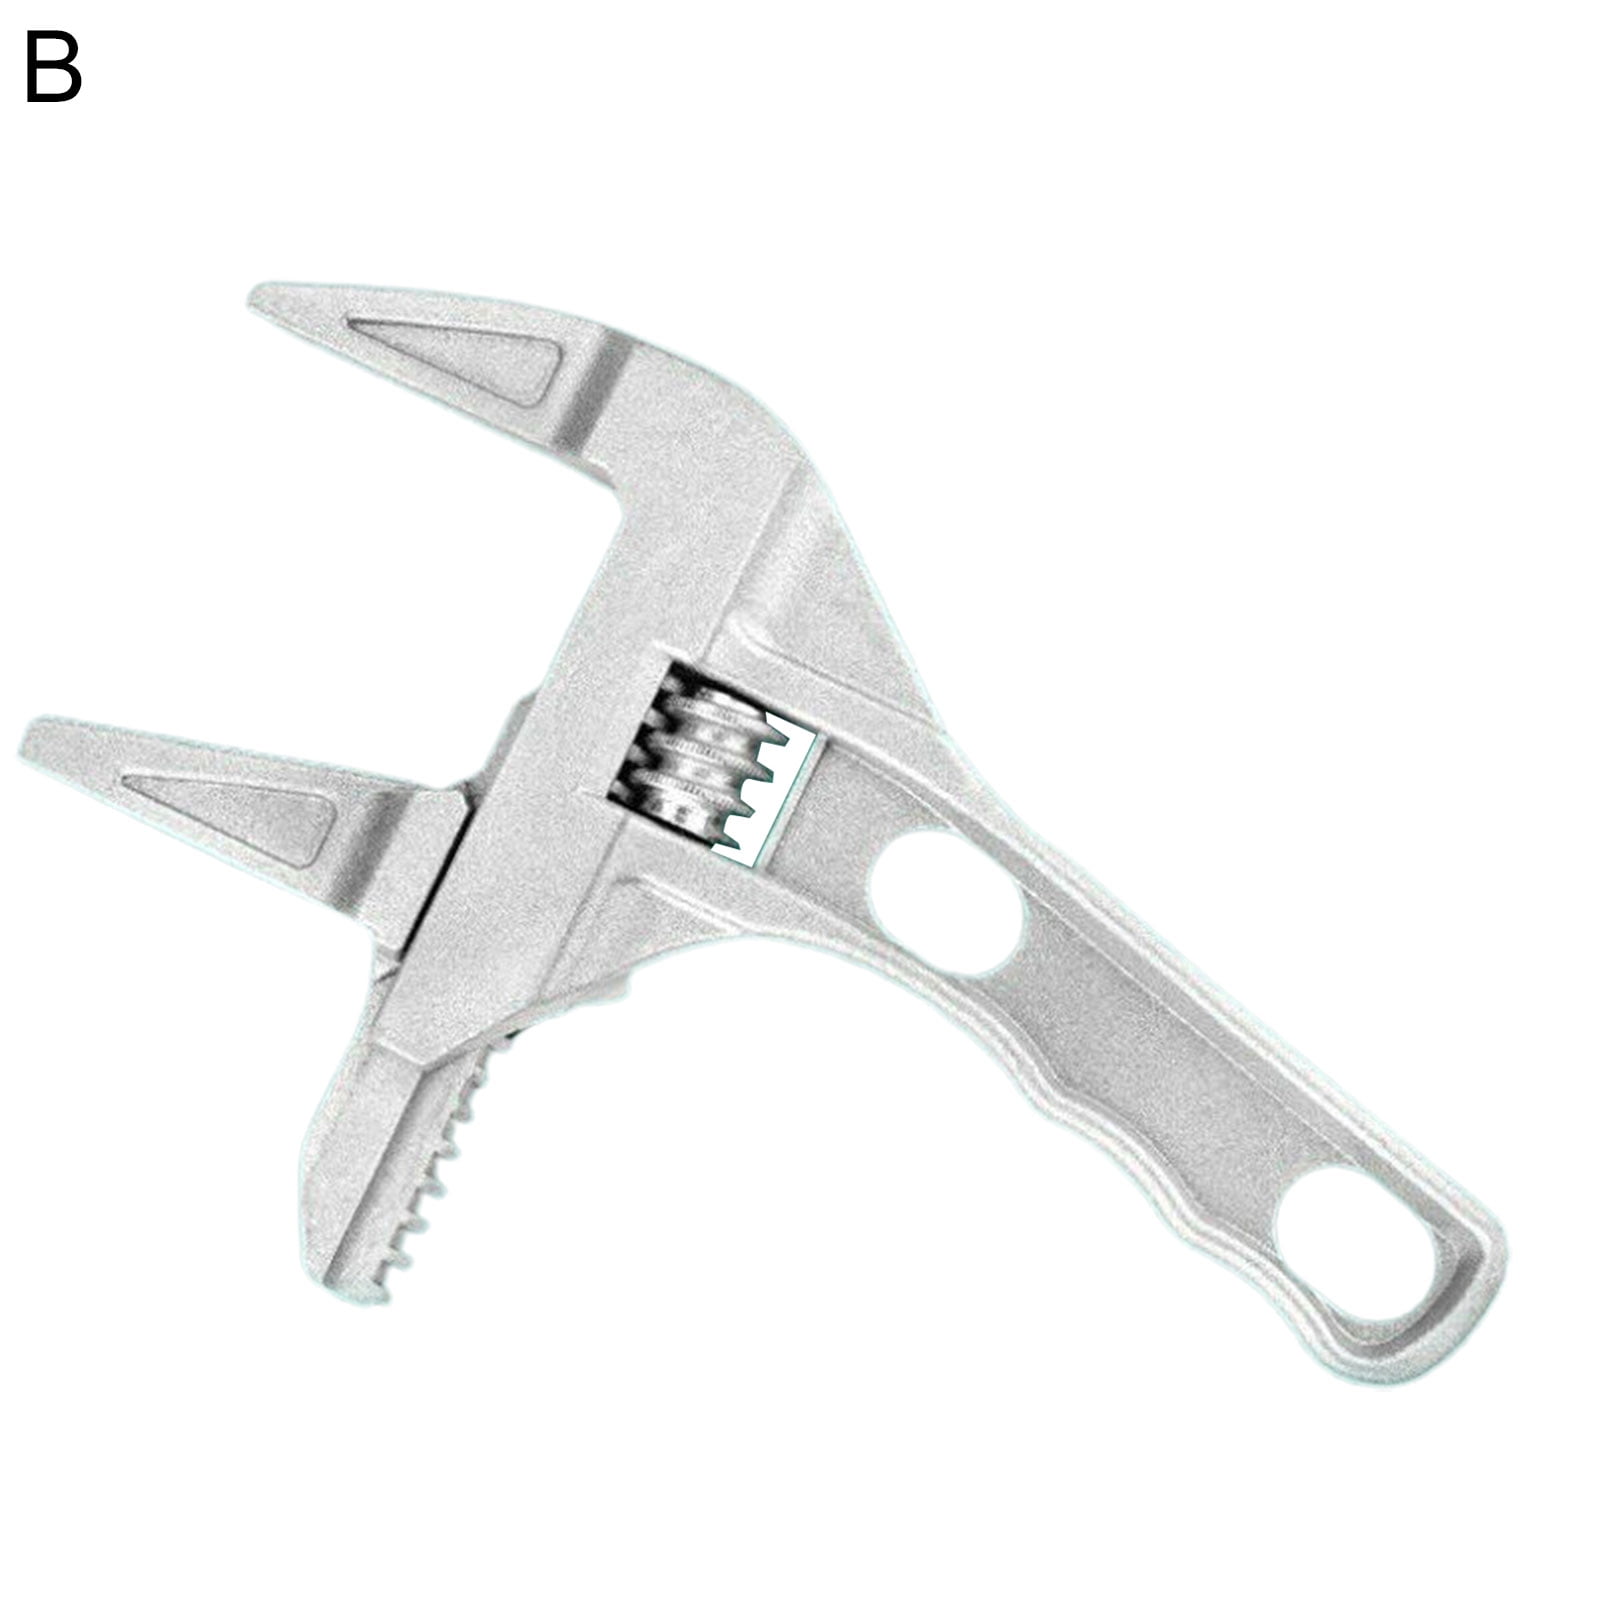 Adjustable Multi Purpose Wrench Spanner Quality Tool Grip Universal Pipe Use